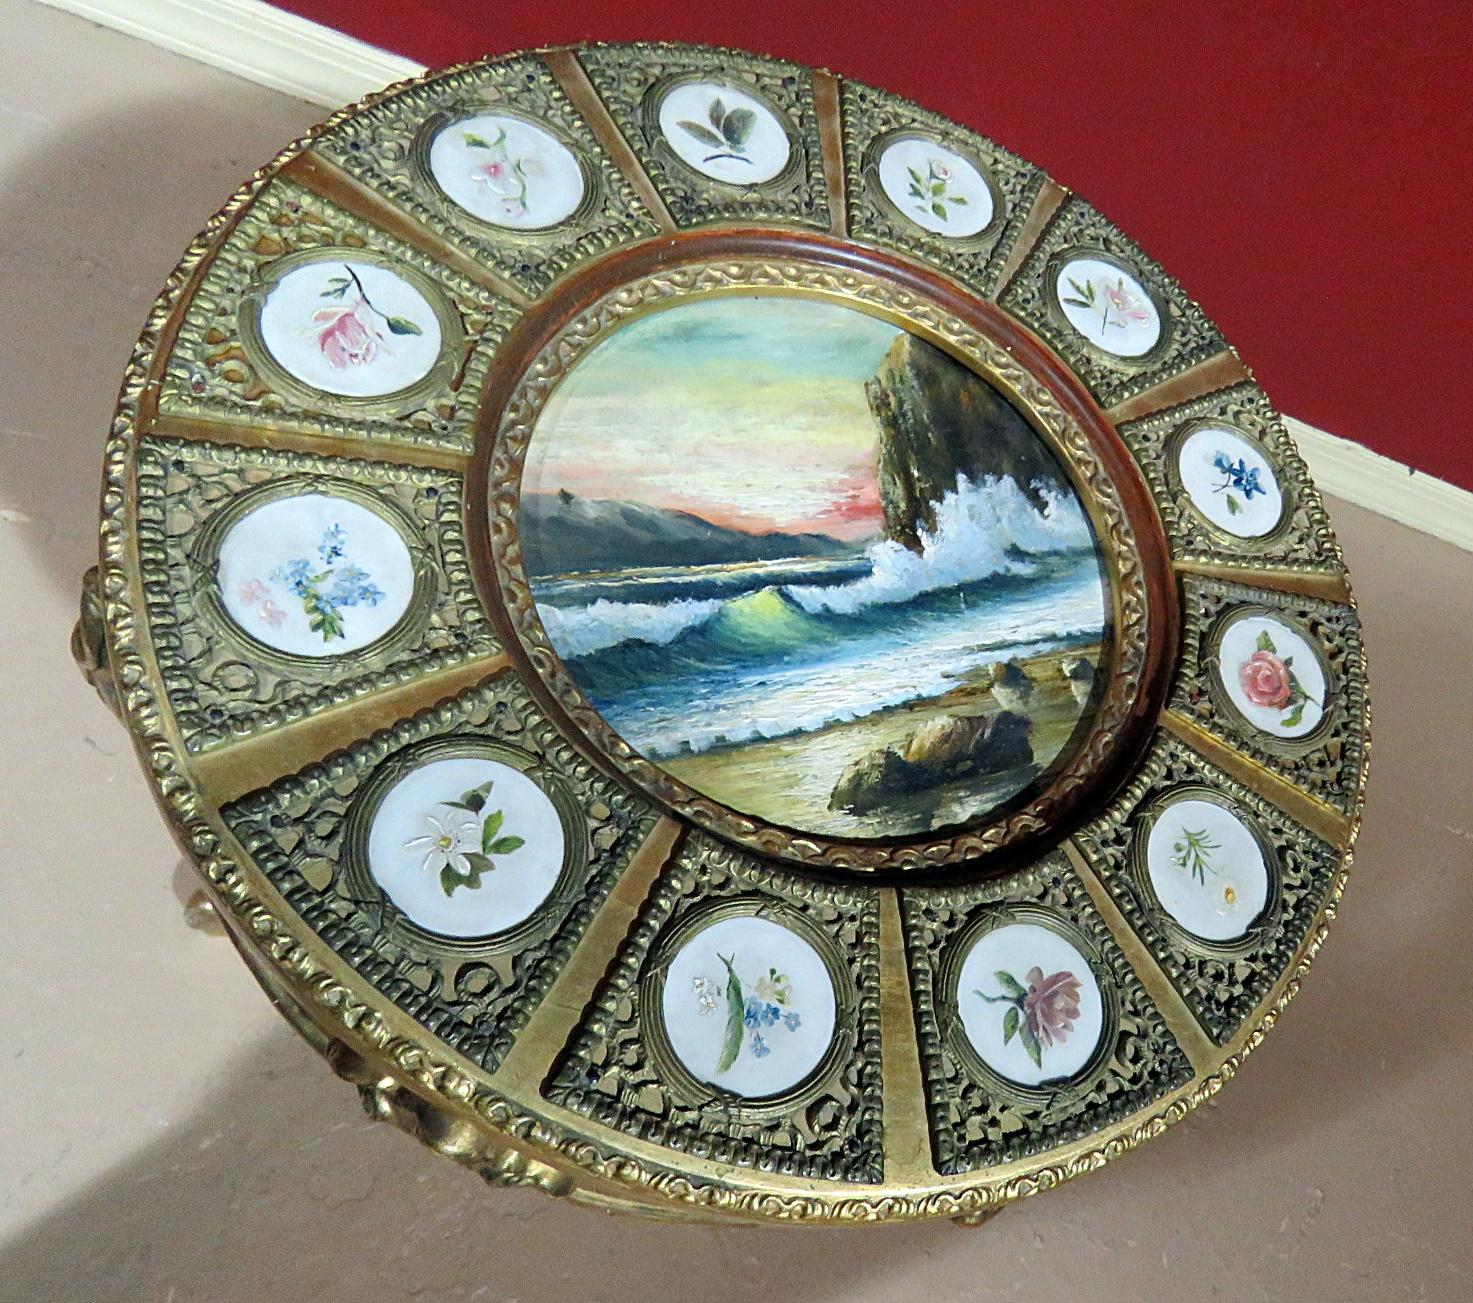 Sevres gilt decorated occasional table with inset painting in the center and 12 porcelain plaques.